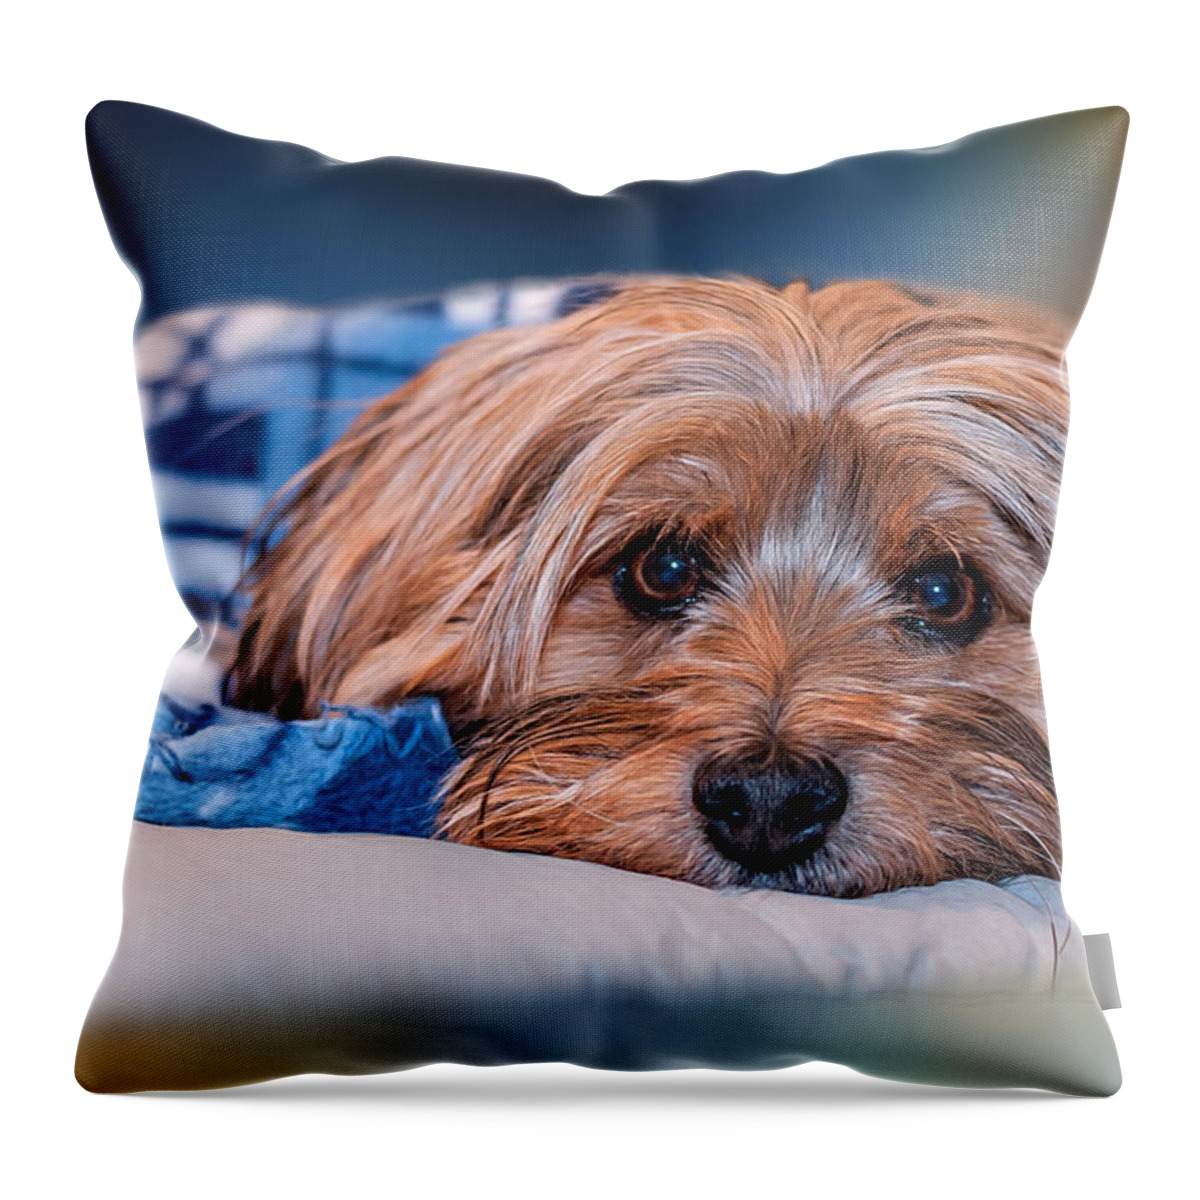 Adorable Throw Pillow featuring the photograph Good Morning by Maria Coulson